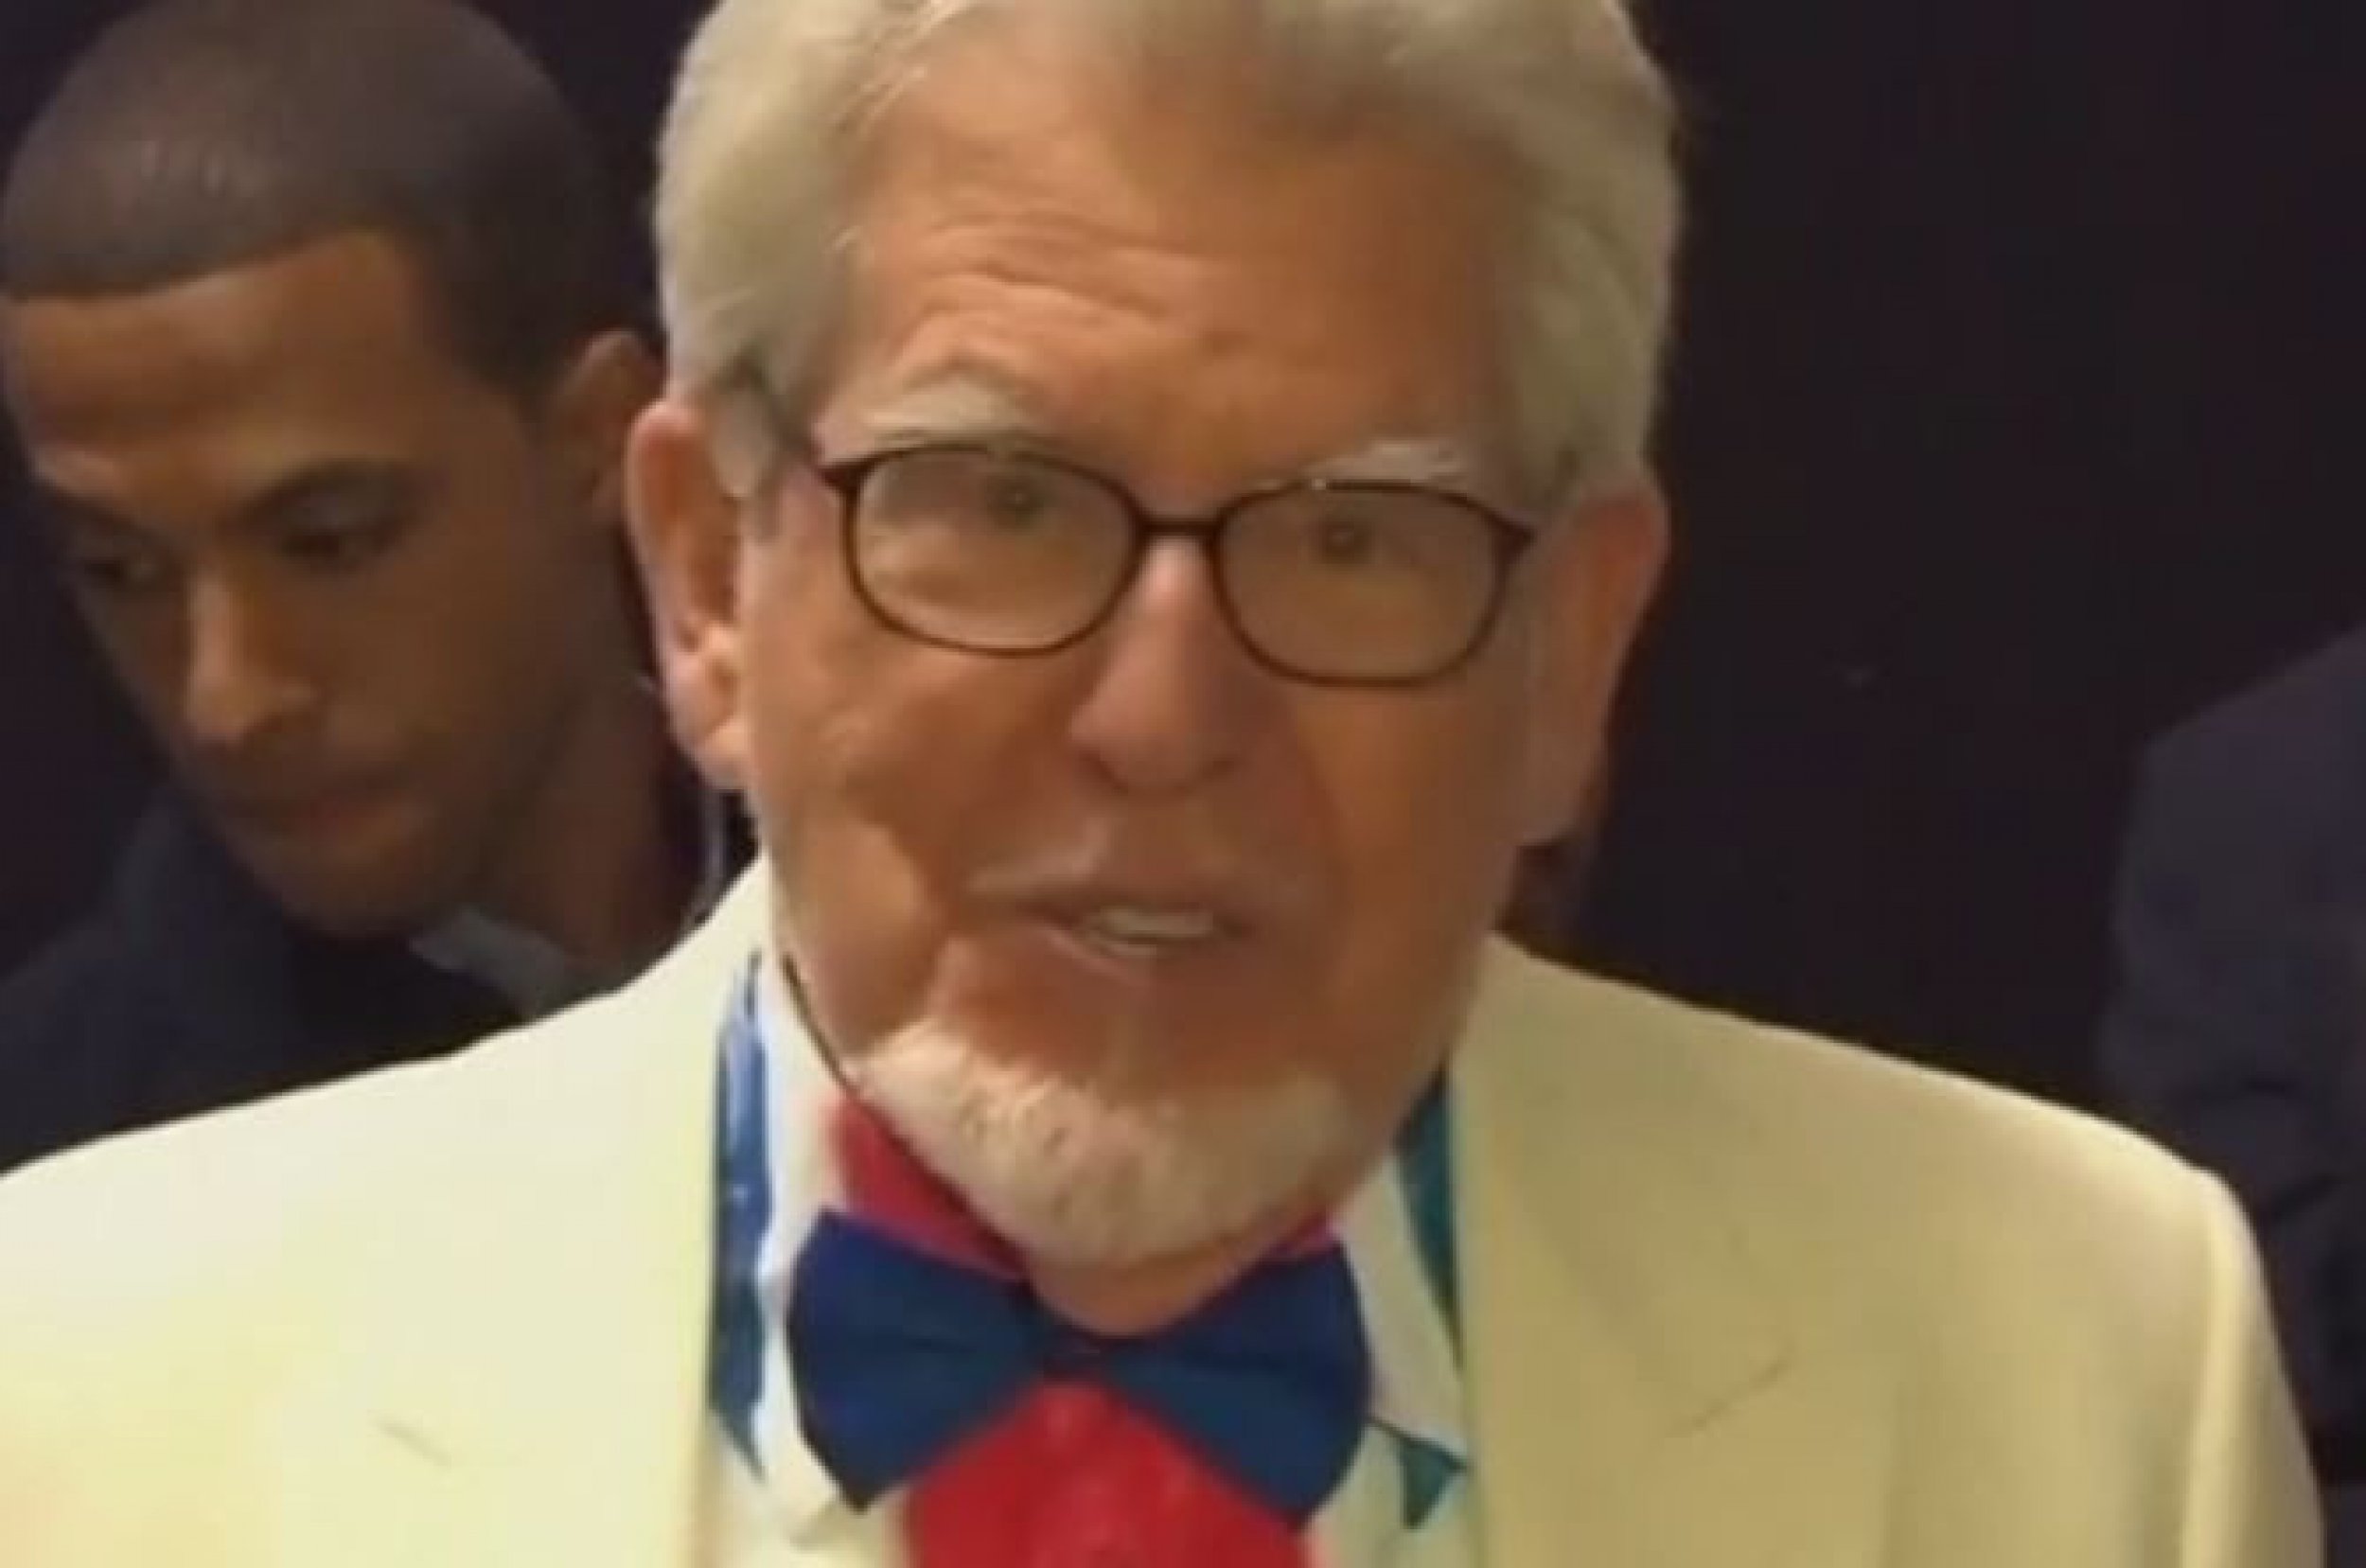 Rolf Harris Charged With 13 Child Sex Offences Shame Clouds Former Entertainer And Star